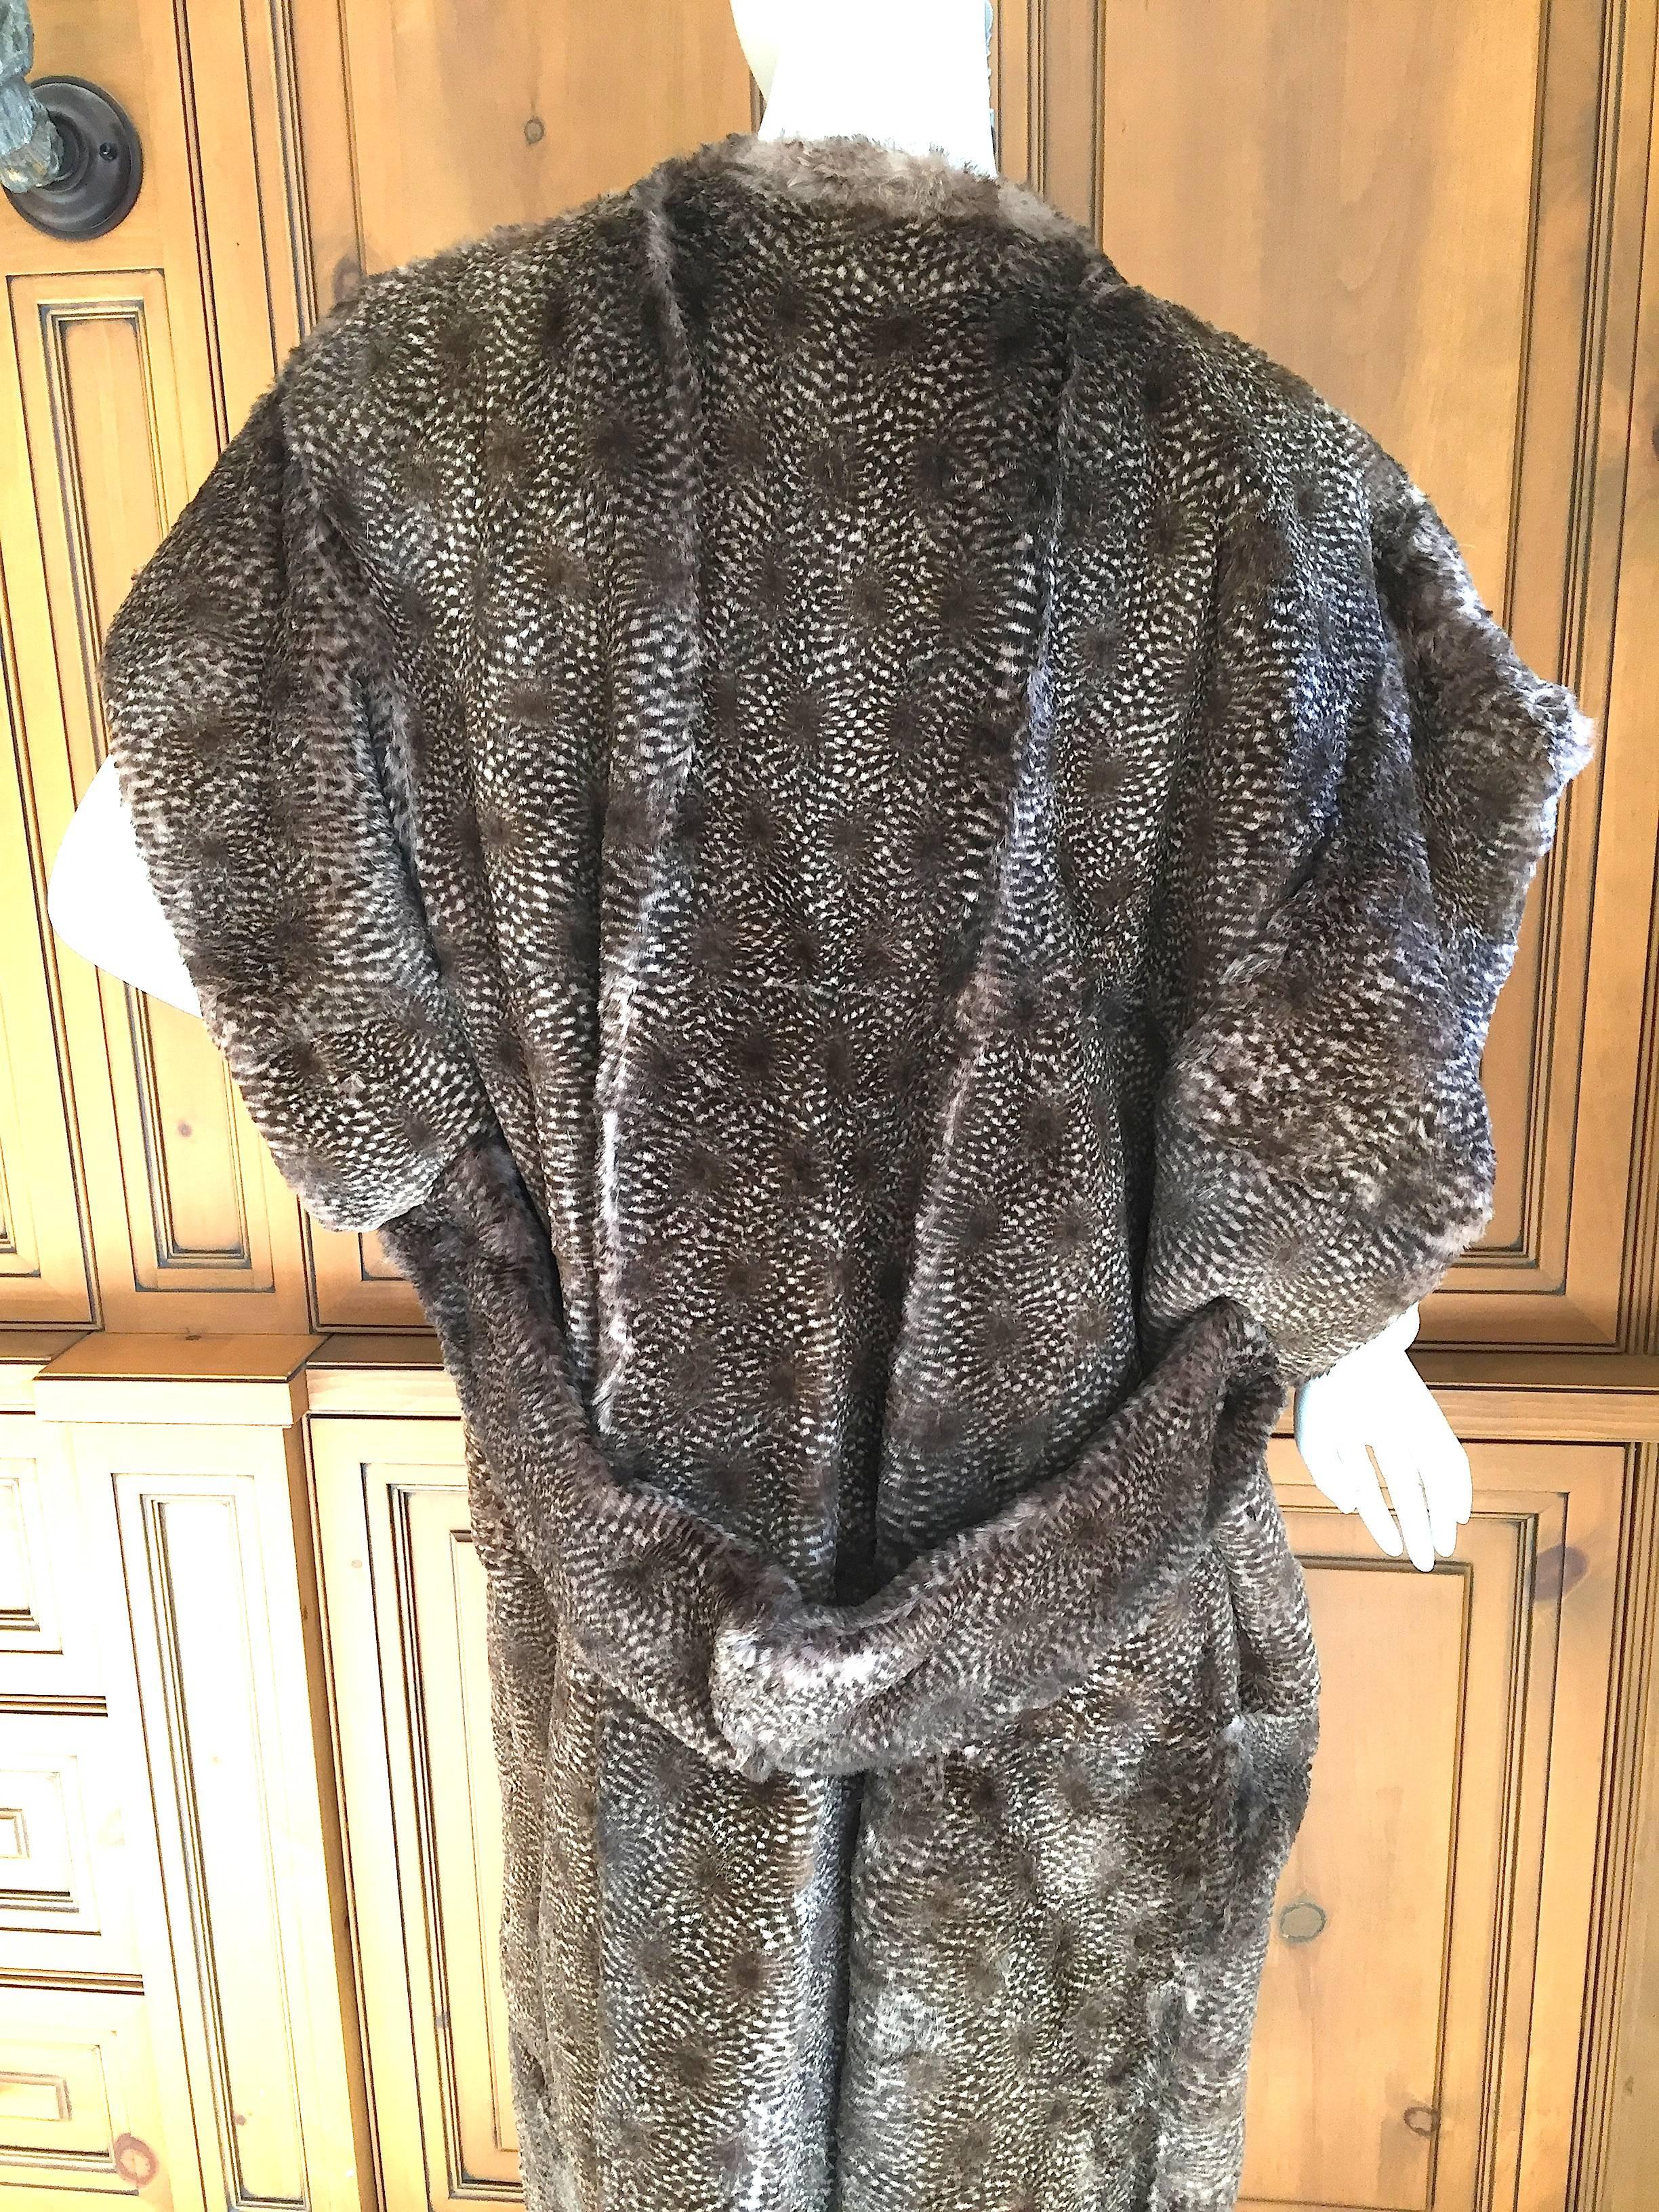 Beautiful long fur vest from Karl Lagerfeld for Fendi , circa 1985.
Very unusual pattern, like turkey feathers, very pretty.
Lined in Logo fabric , from I. Magnin , San Francisco.
I'm not certain of the fur type perhaps sheared beaver, perhaps